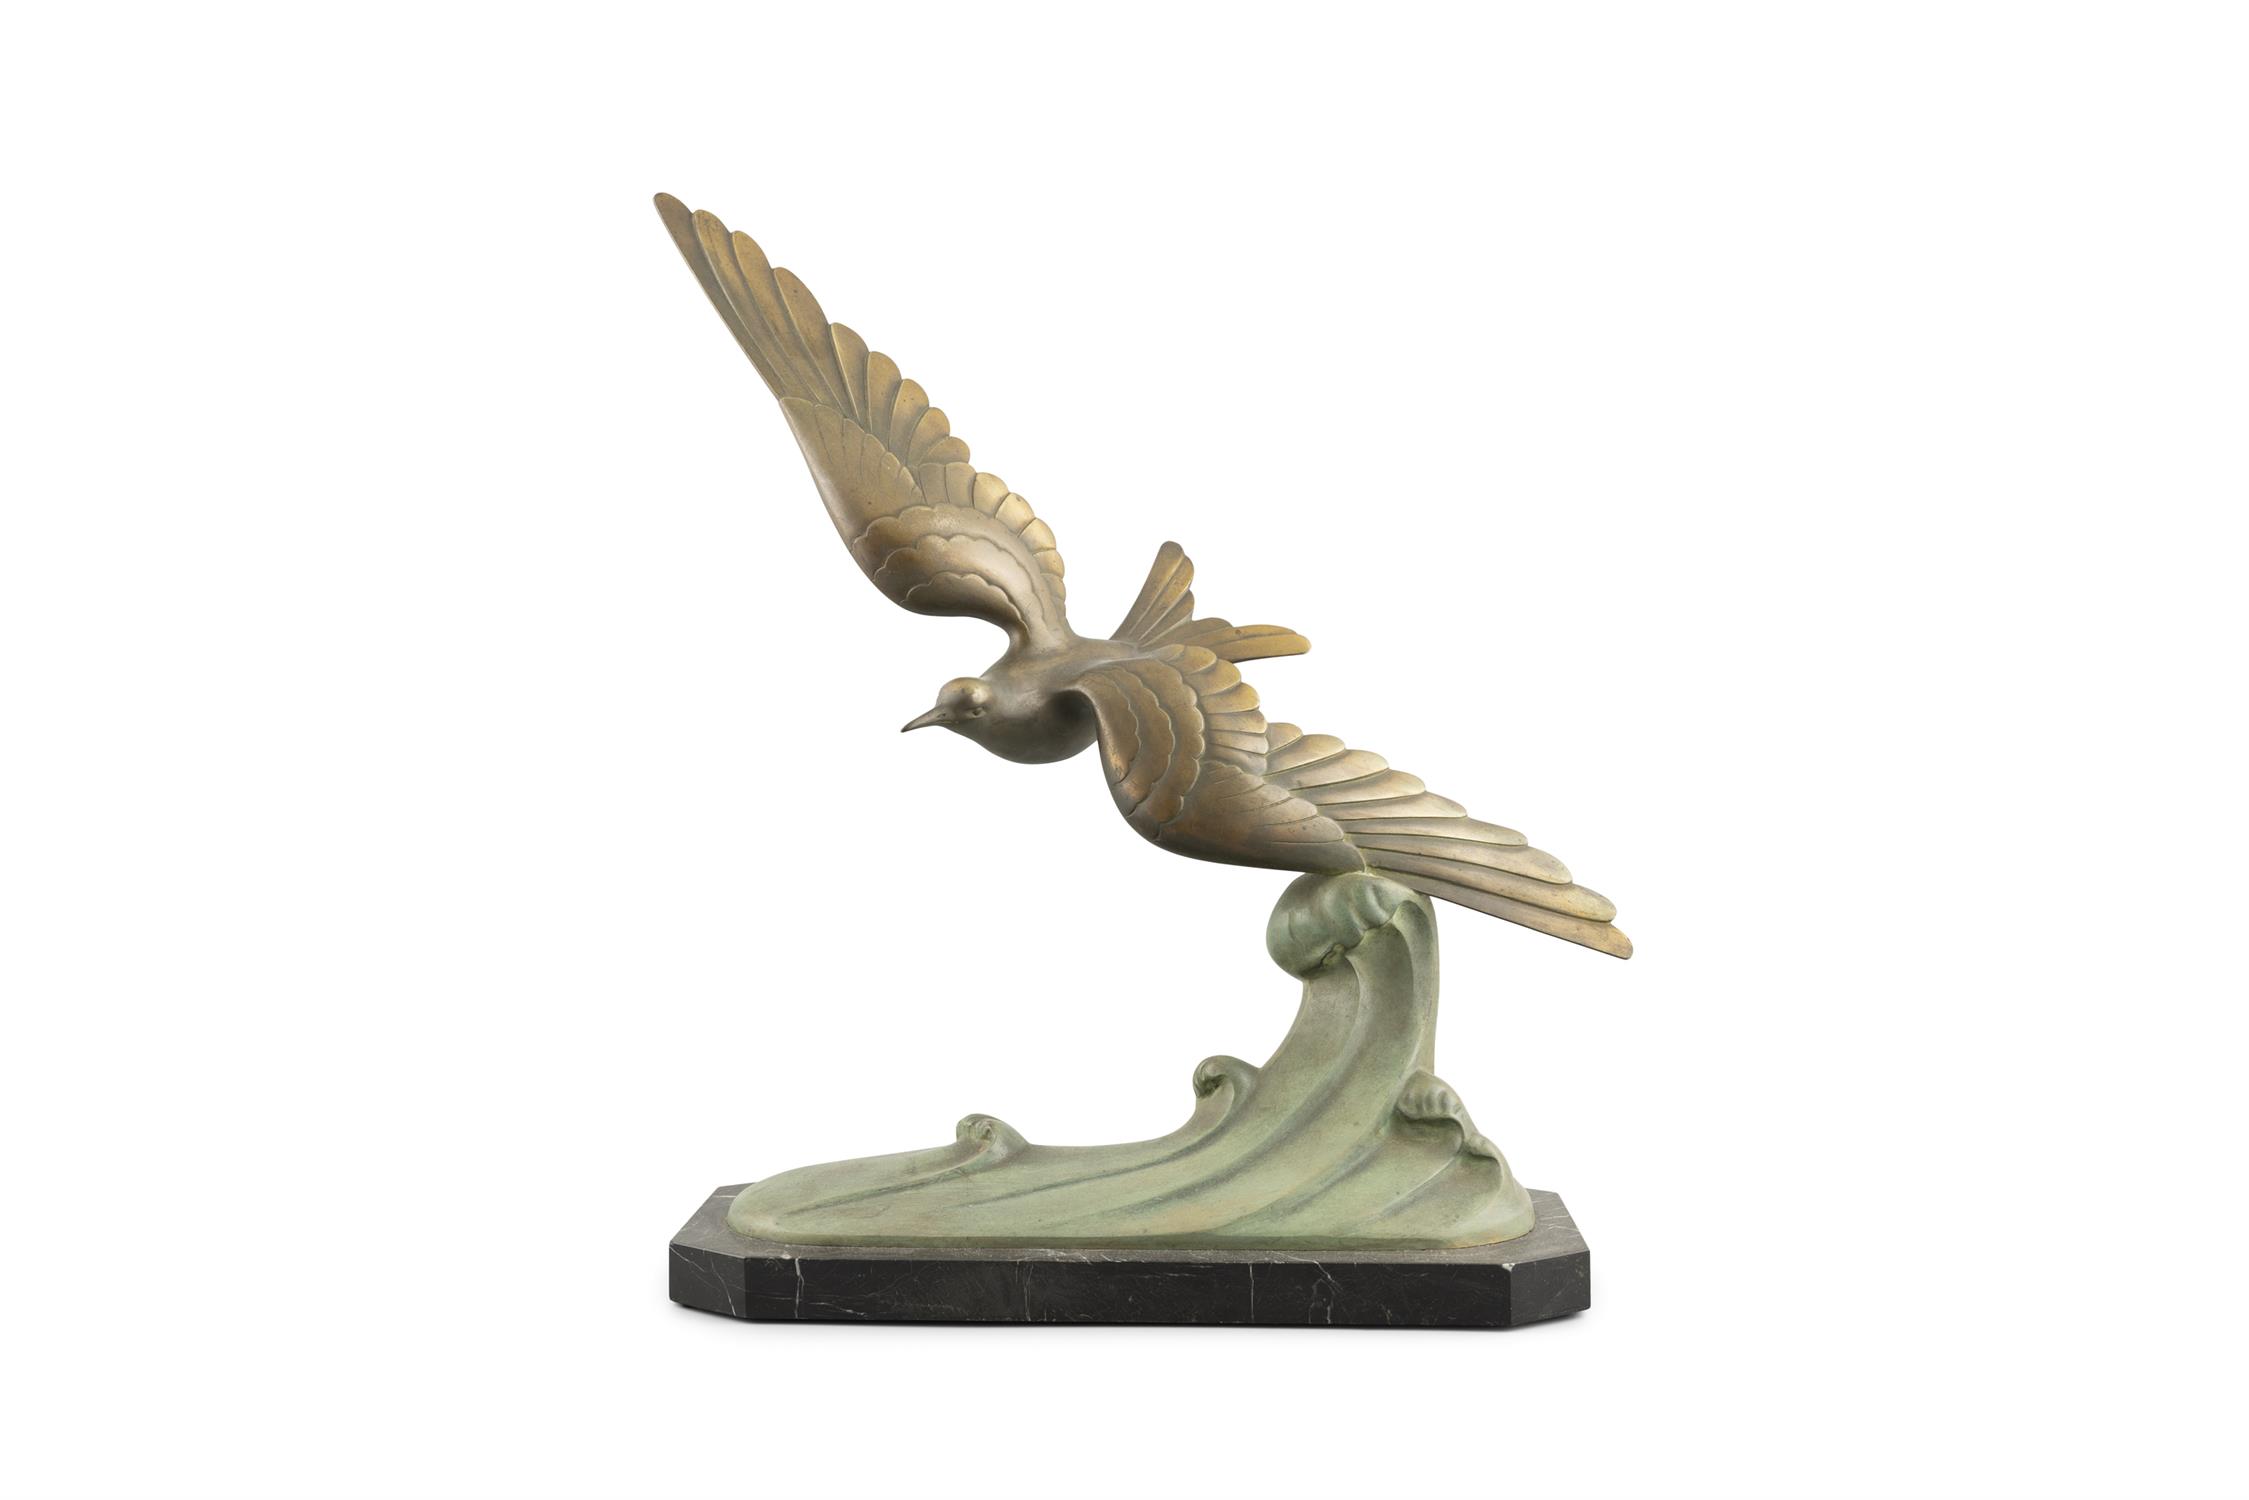 J. BRAULT, French 20th Century Crest of a Wave, Bronze model of a seagull, 59 x 46cm Signed on